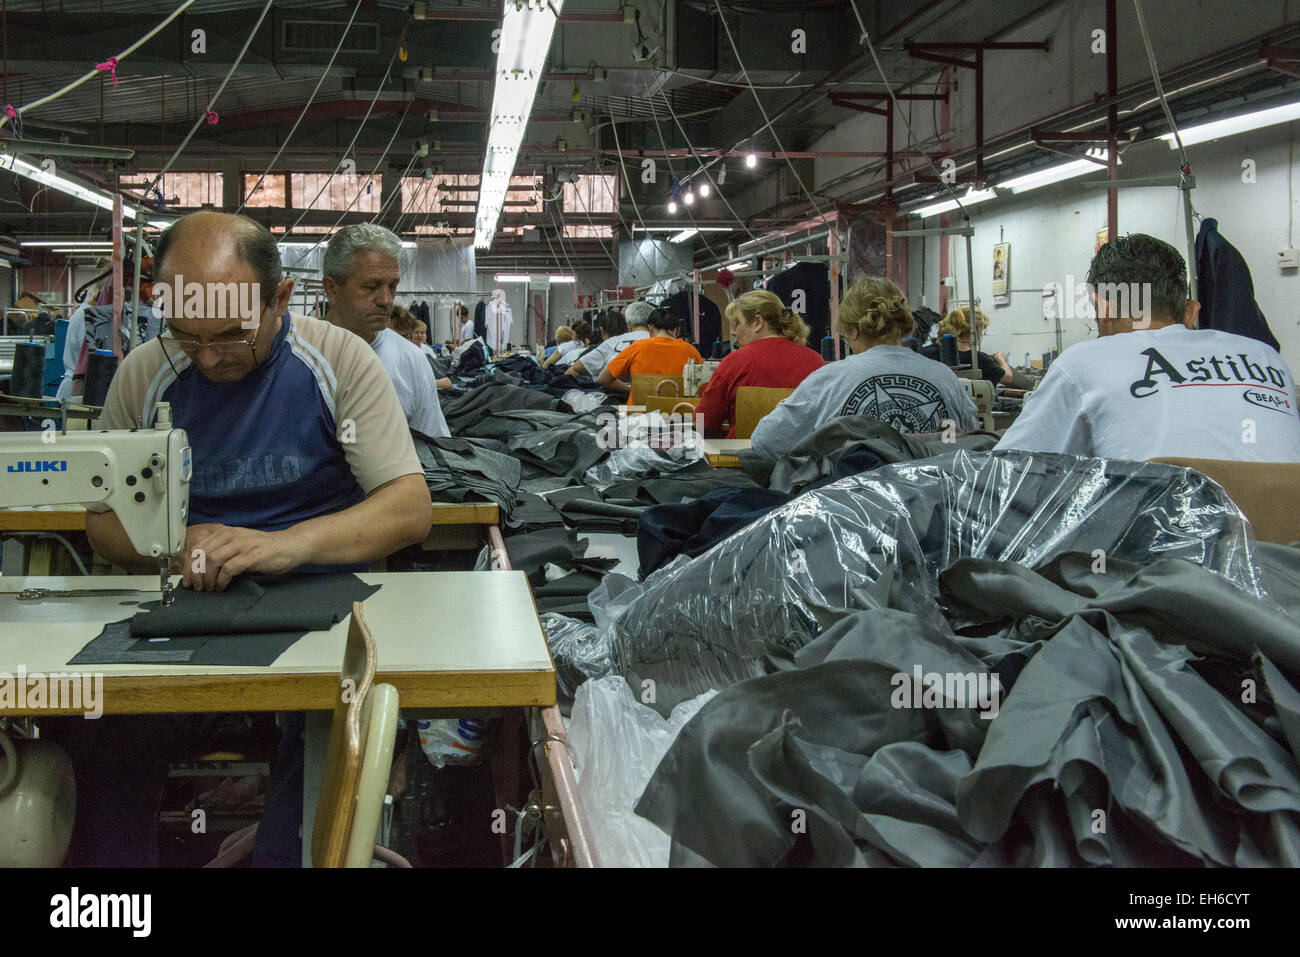 Workers Sewing, Astibo Garment Factory, Štip Stock Photo